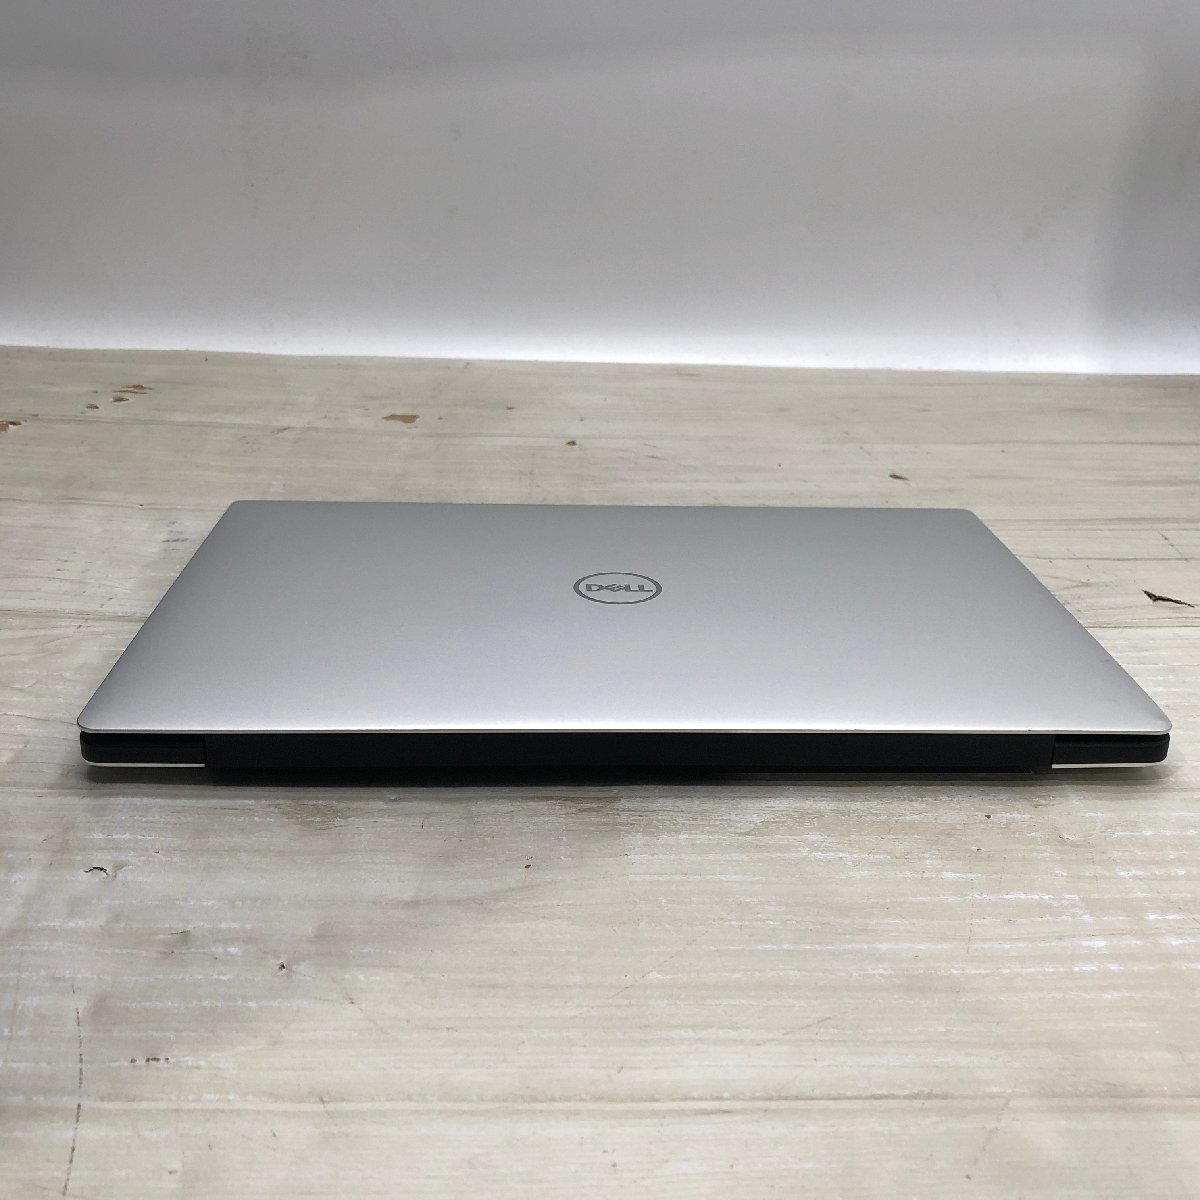 DELL XPS 13 9380 Core i7 8665U 1.90GHz/16GB/なし 〔A0515〕_画像7